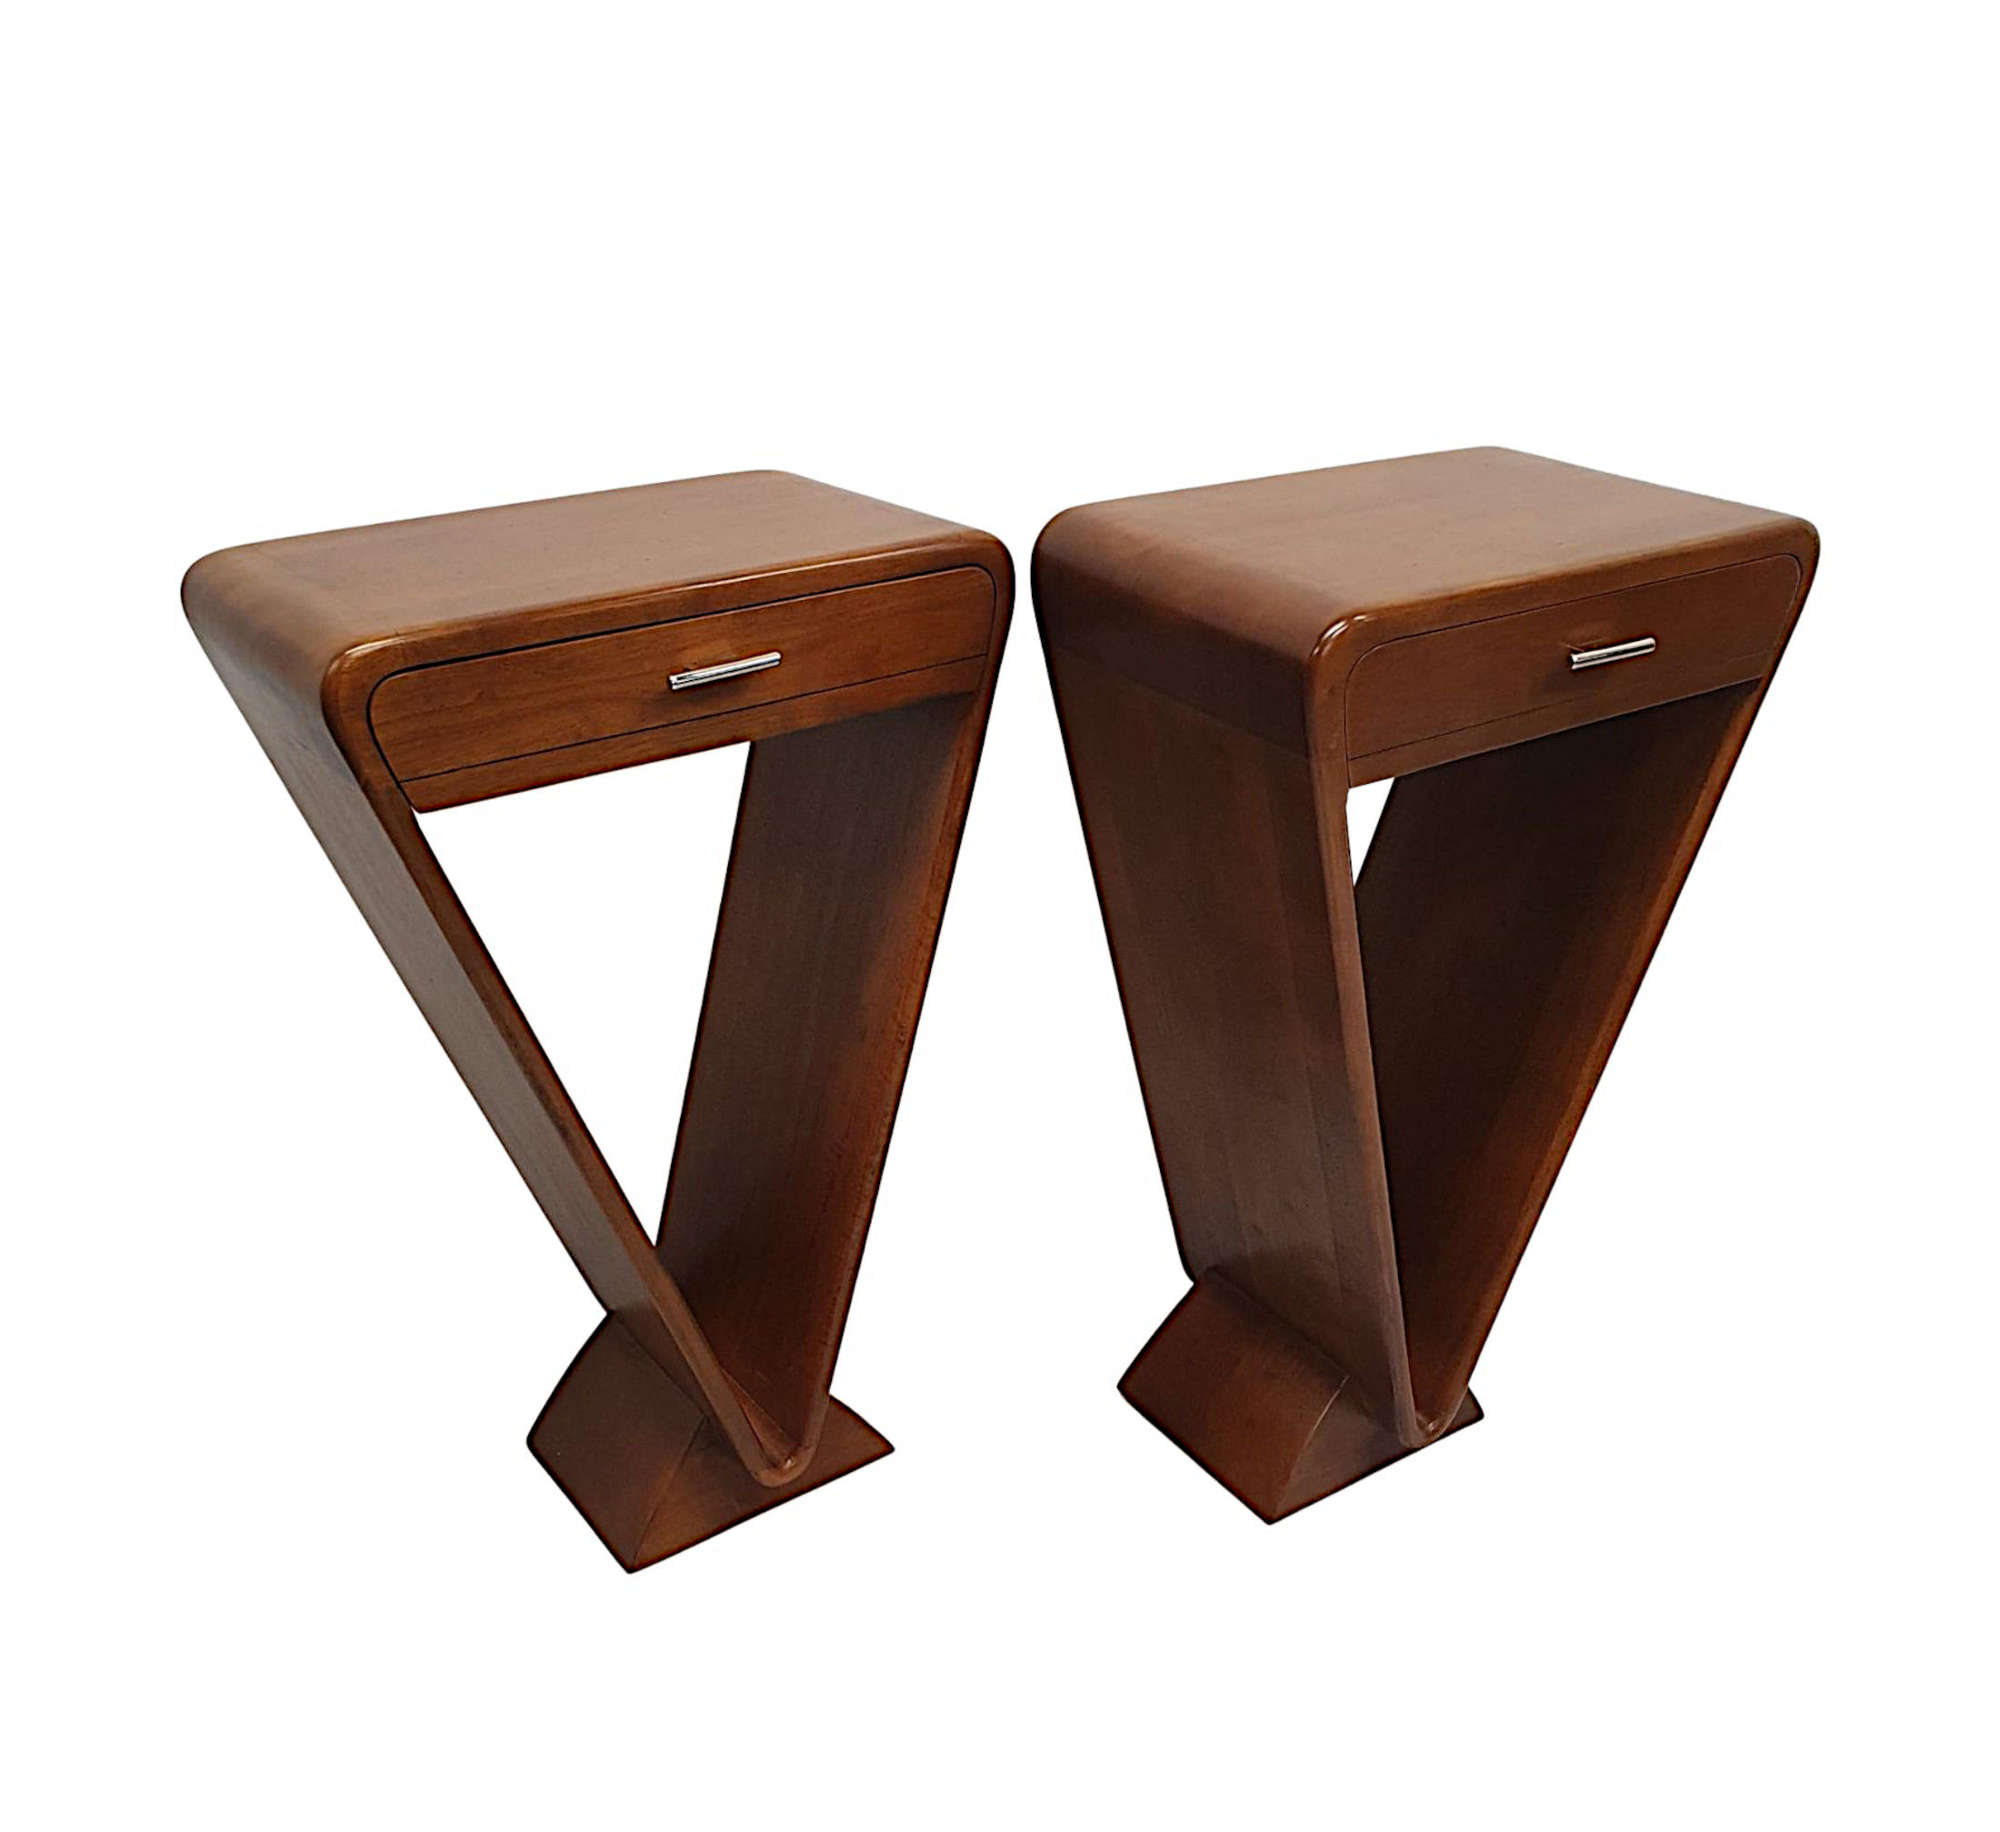 A Fabulous Pair Of Bedside Or Vintage Side Tables In The Art Deco Style